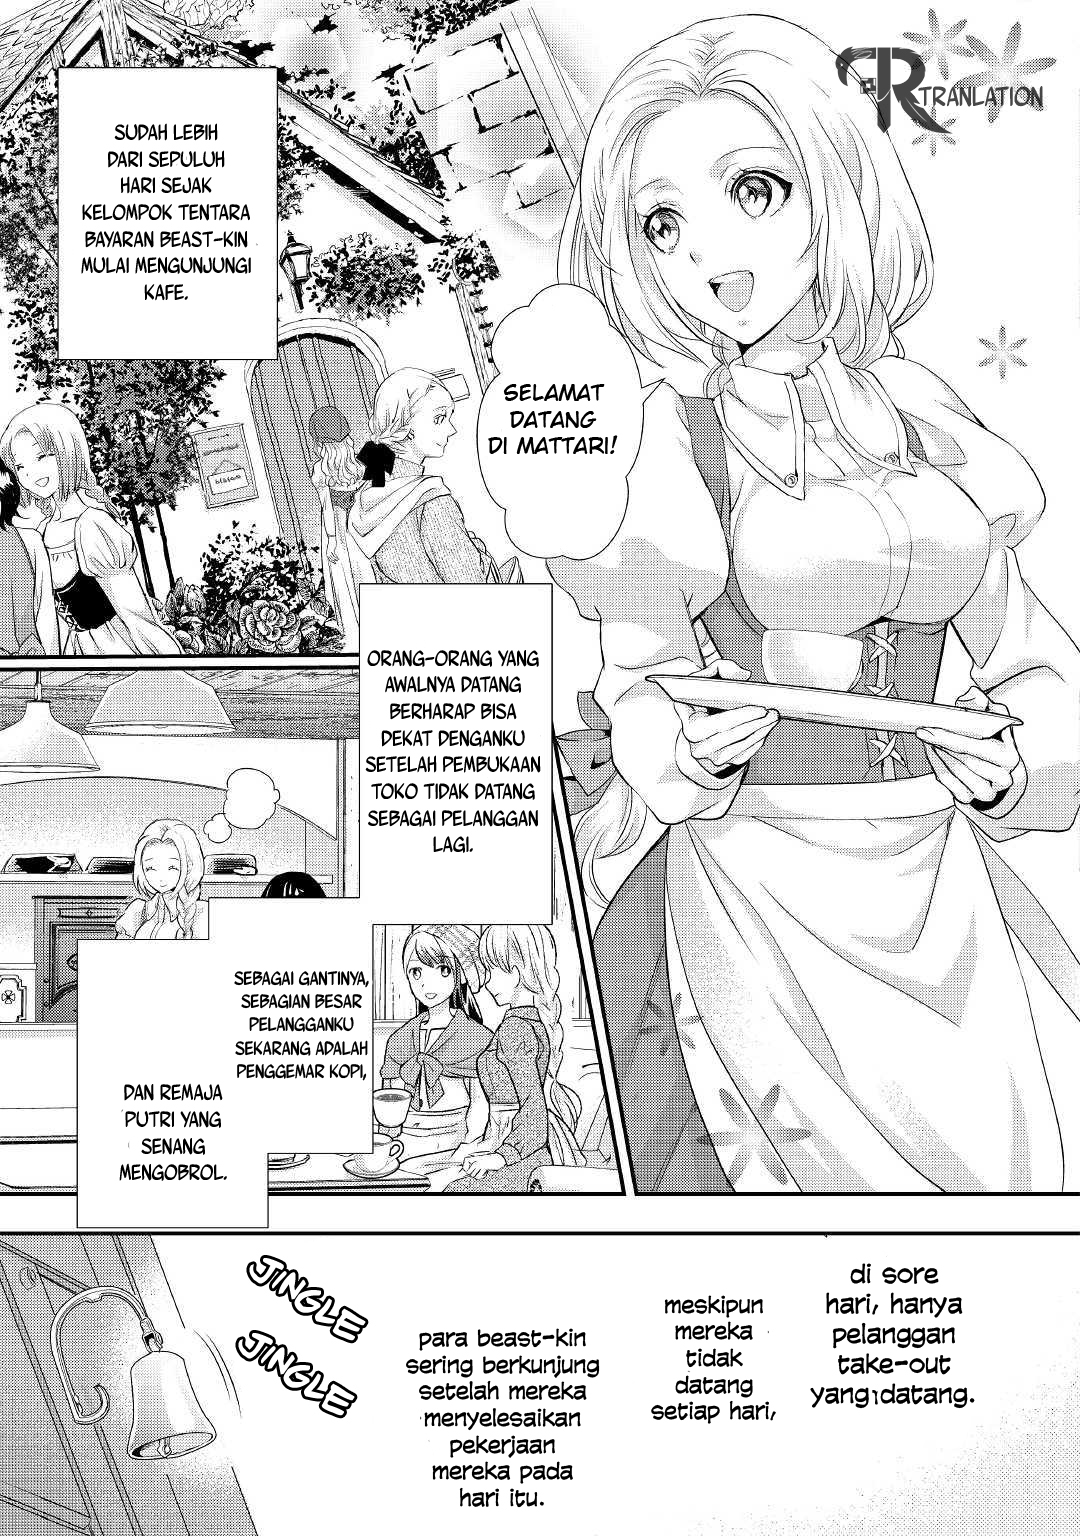 Milady Just Wants to Relax Chapter 7.2